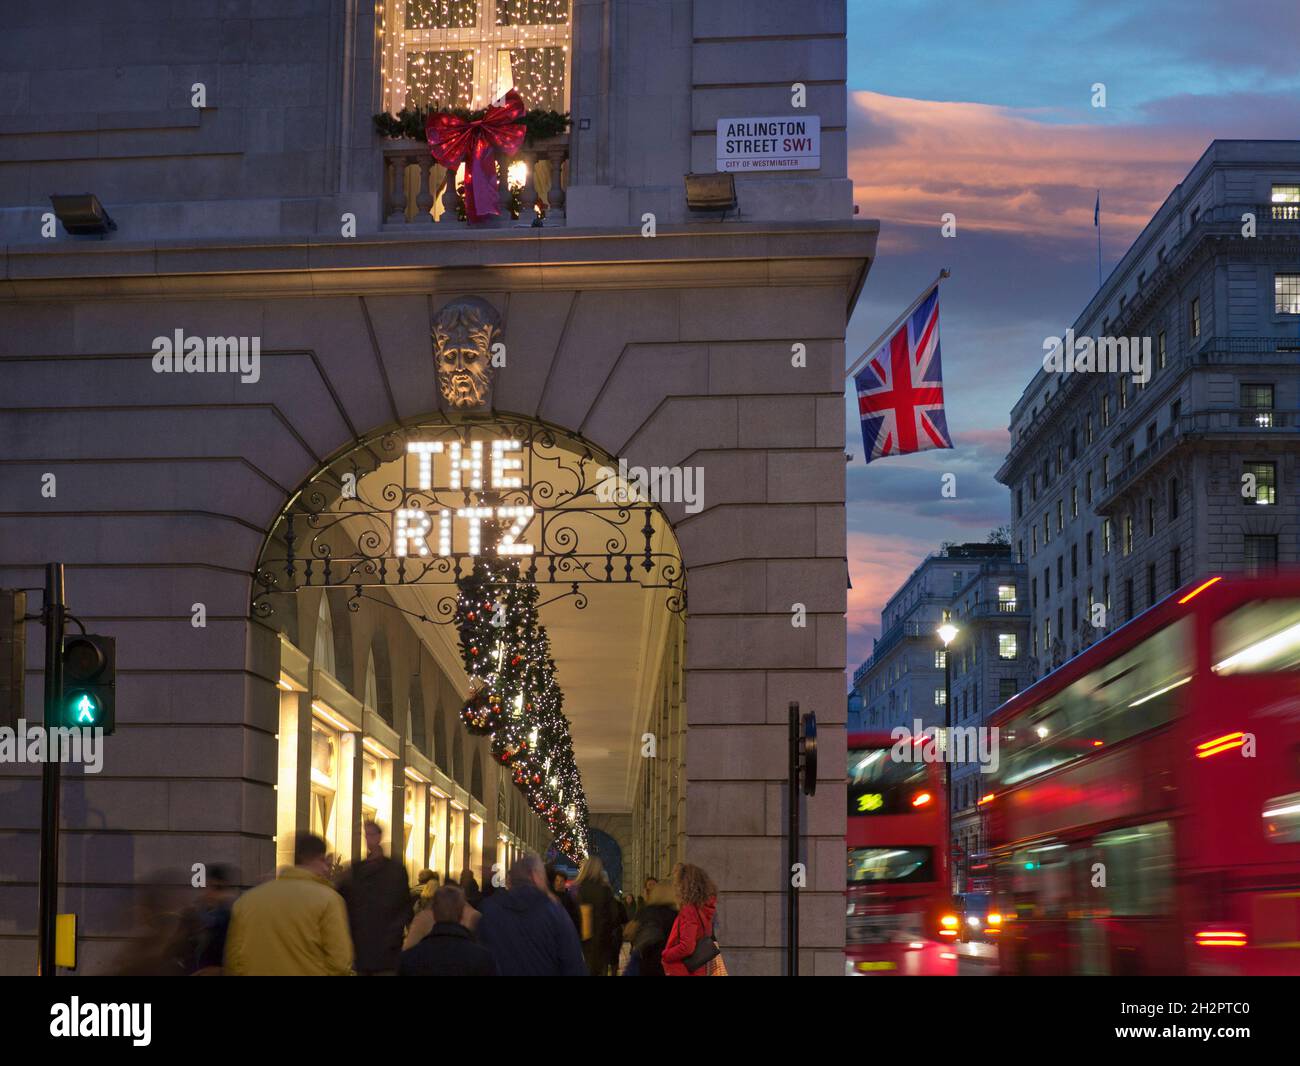 RITZ LONDON CHRISTMAS CROWDS The Ritz Hotel at winter busy festive season, evening night lights ‘The Ritz’ sign illuminated, with a Union Jack flag, shoppers and passing blurred London red buses Arlington Street Piccadilly London UK Stock Photo